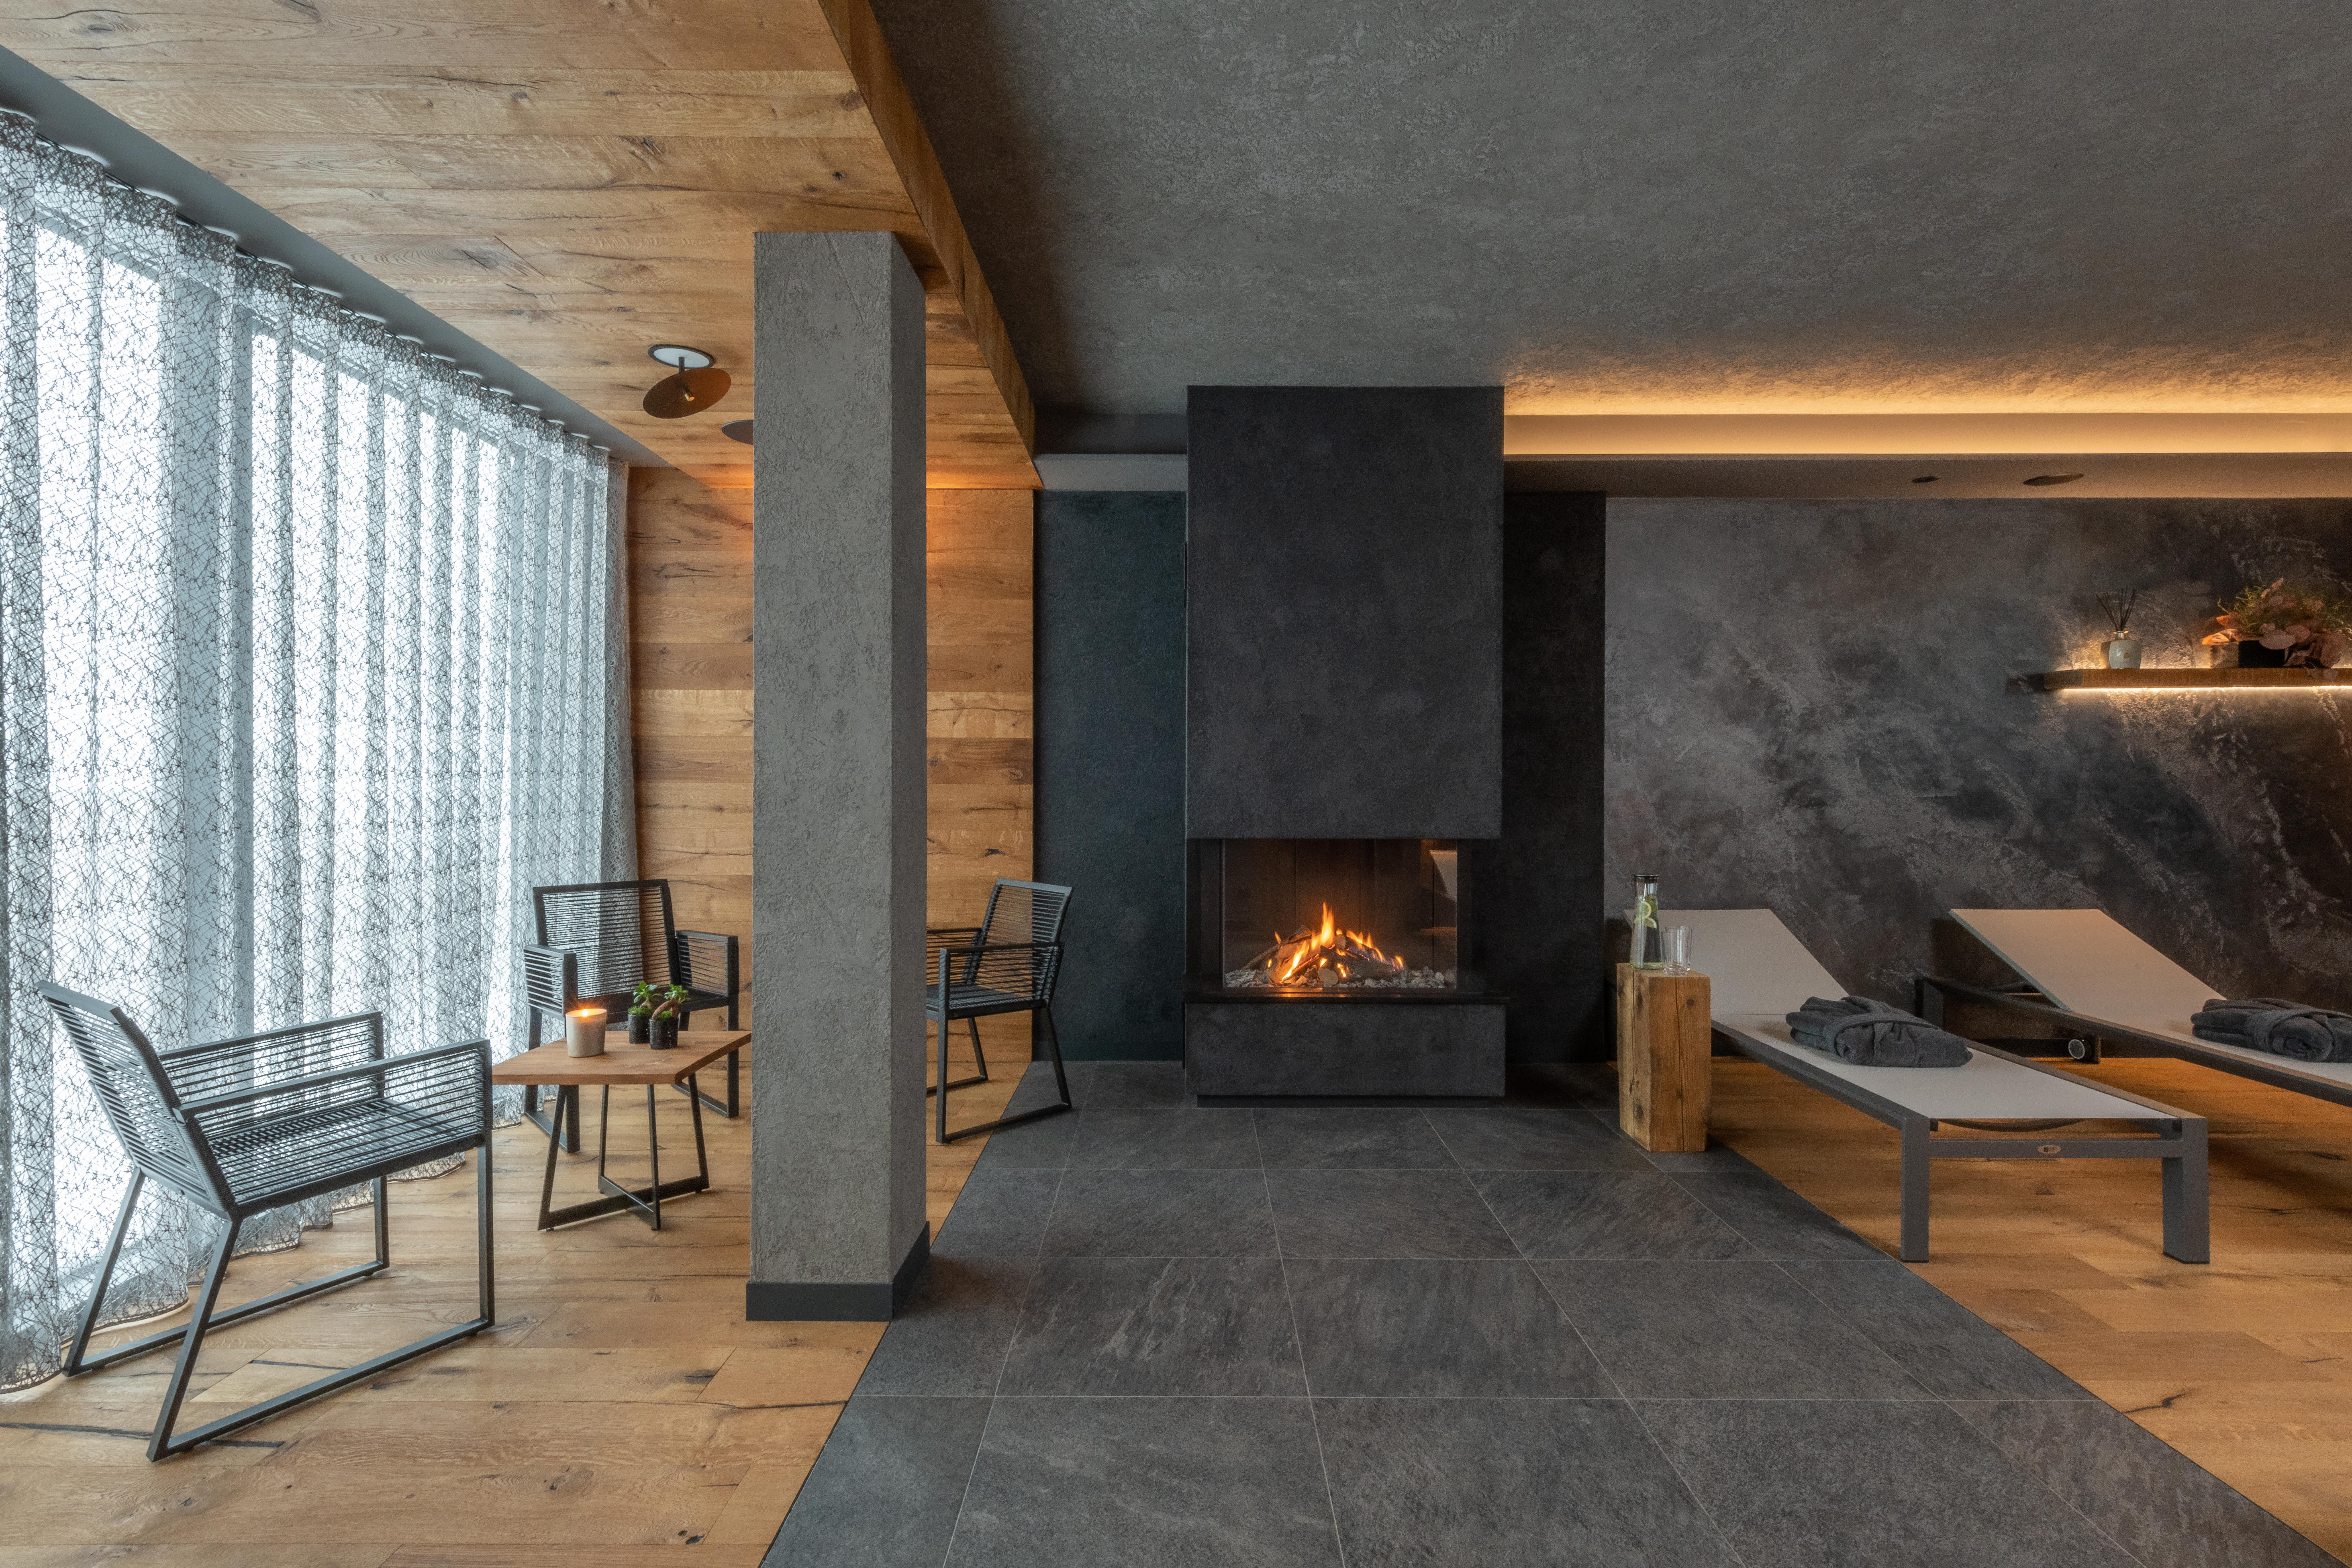 Luxury wellness hotel with fireplace in spa rest area